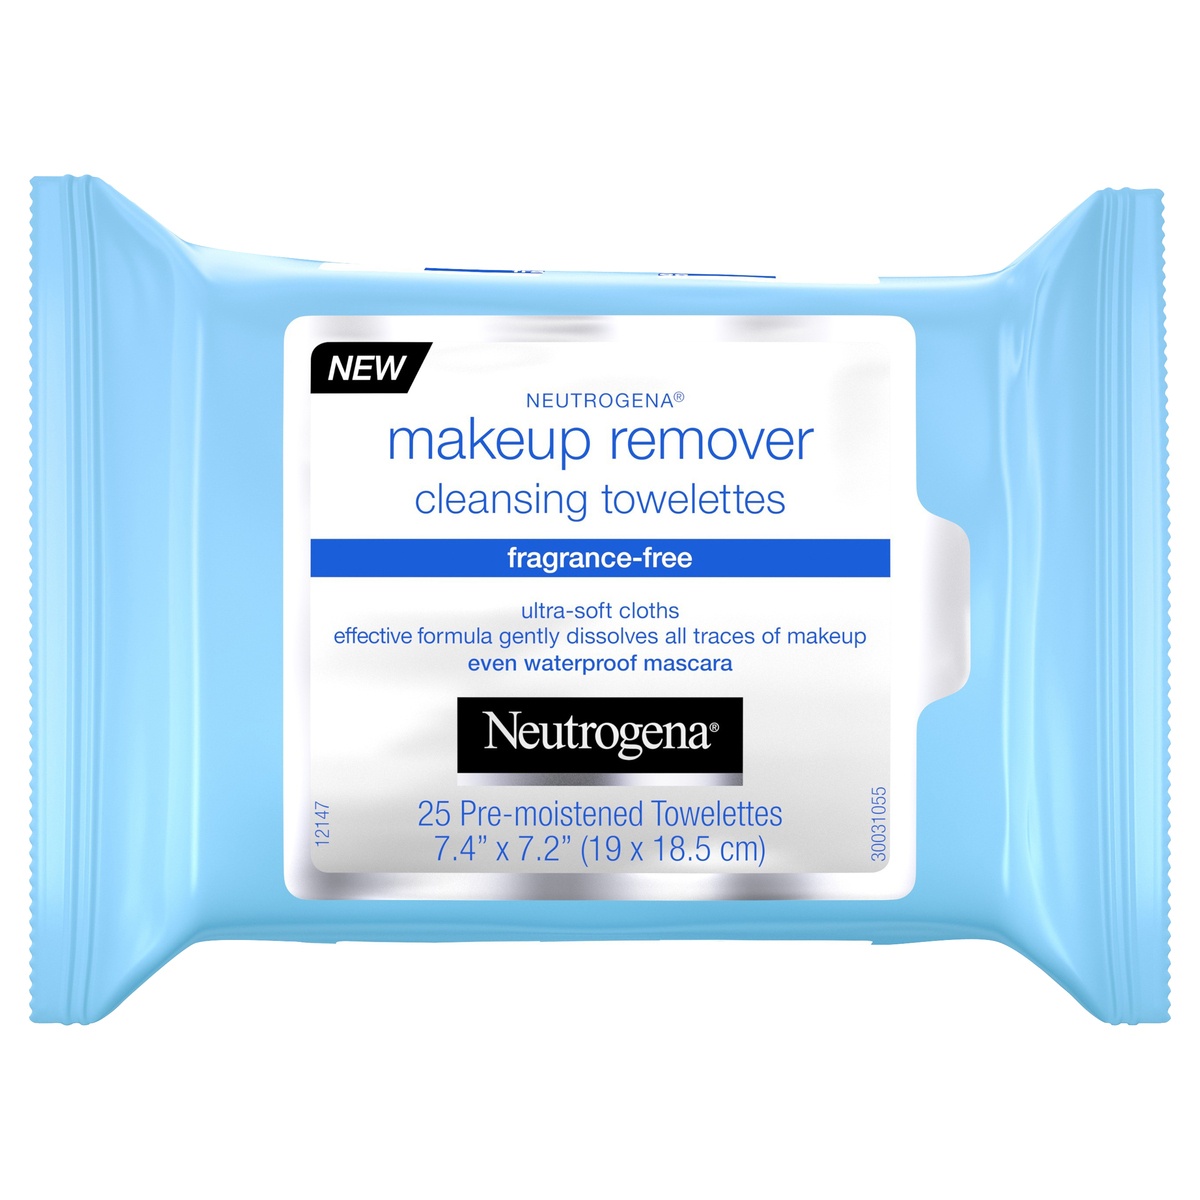 slide 5 of 7, Neutrogena Fragrance-Free Makeup Remover Face Wipes, Daily Facial Cleansing Towelettes for Waterproof Makeup, Dirt & Oil, Gentle, Alcohol- & Fragrance Free, 100% Plant-Based Fibers, 25 ct